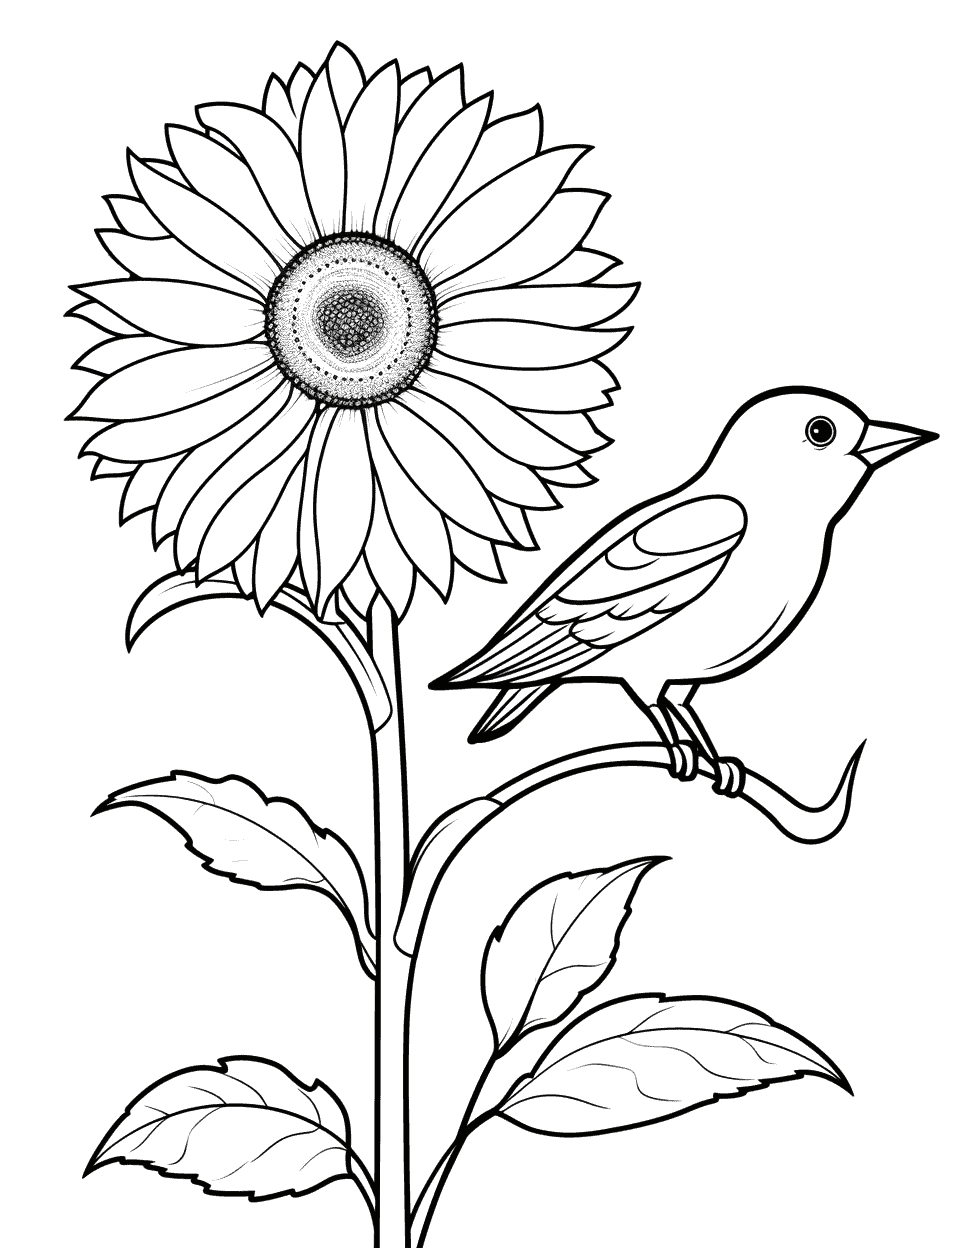 Sunflower and Bird Coloring Page - A small bird sitting on the sunflower.